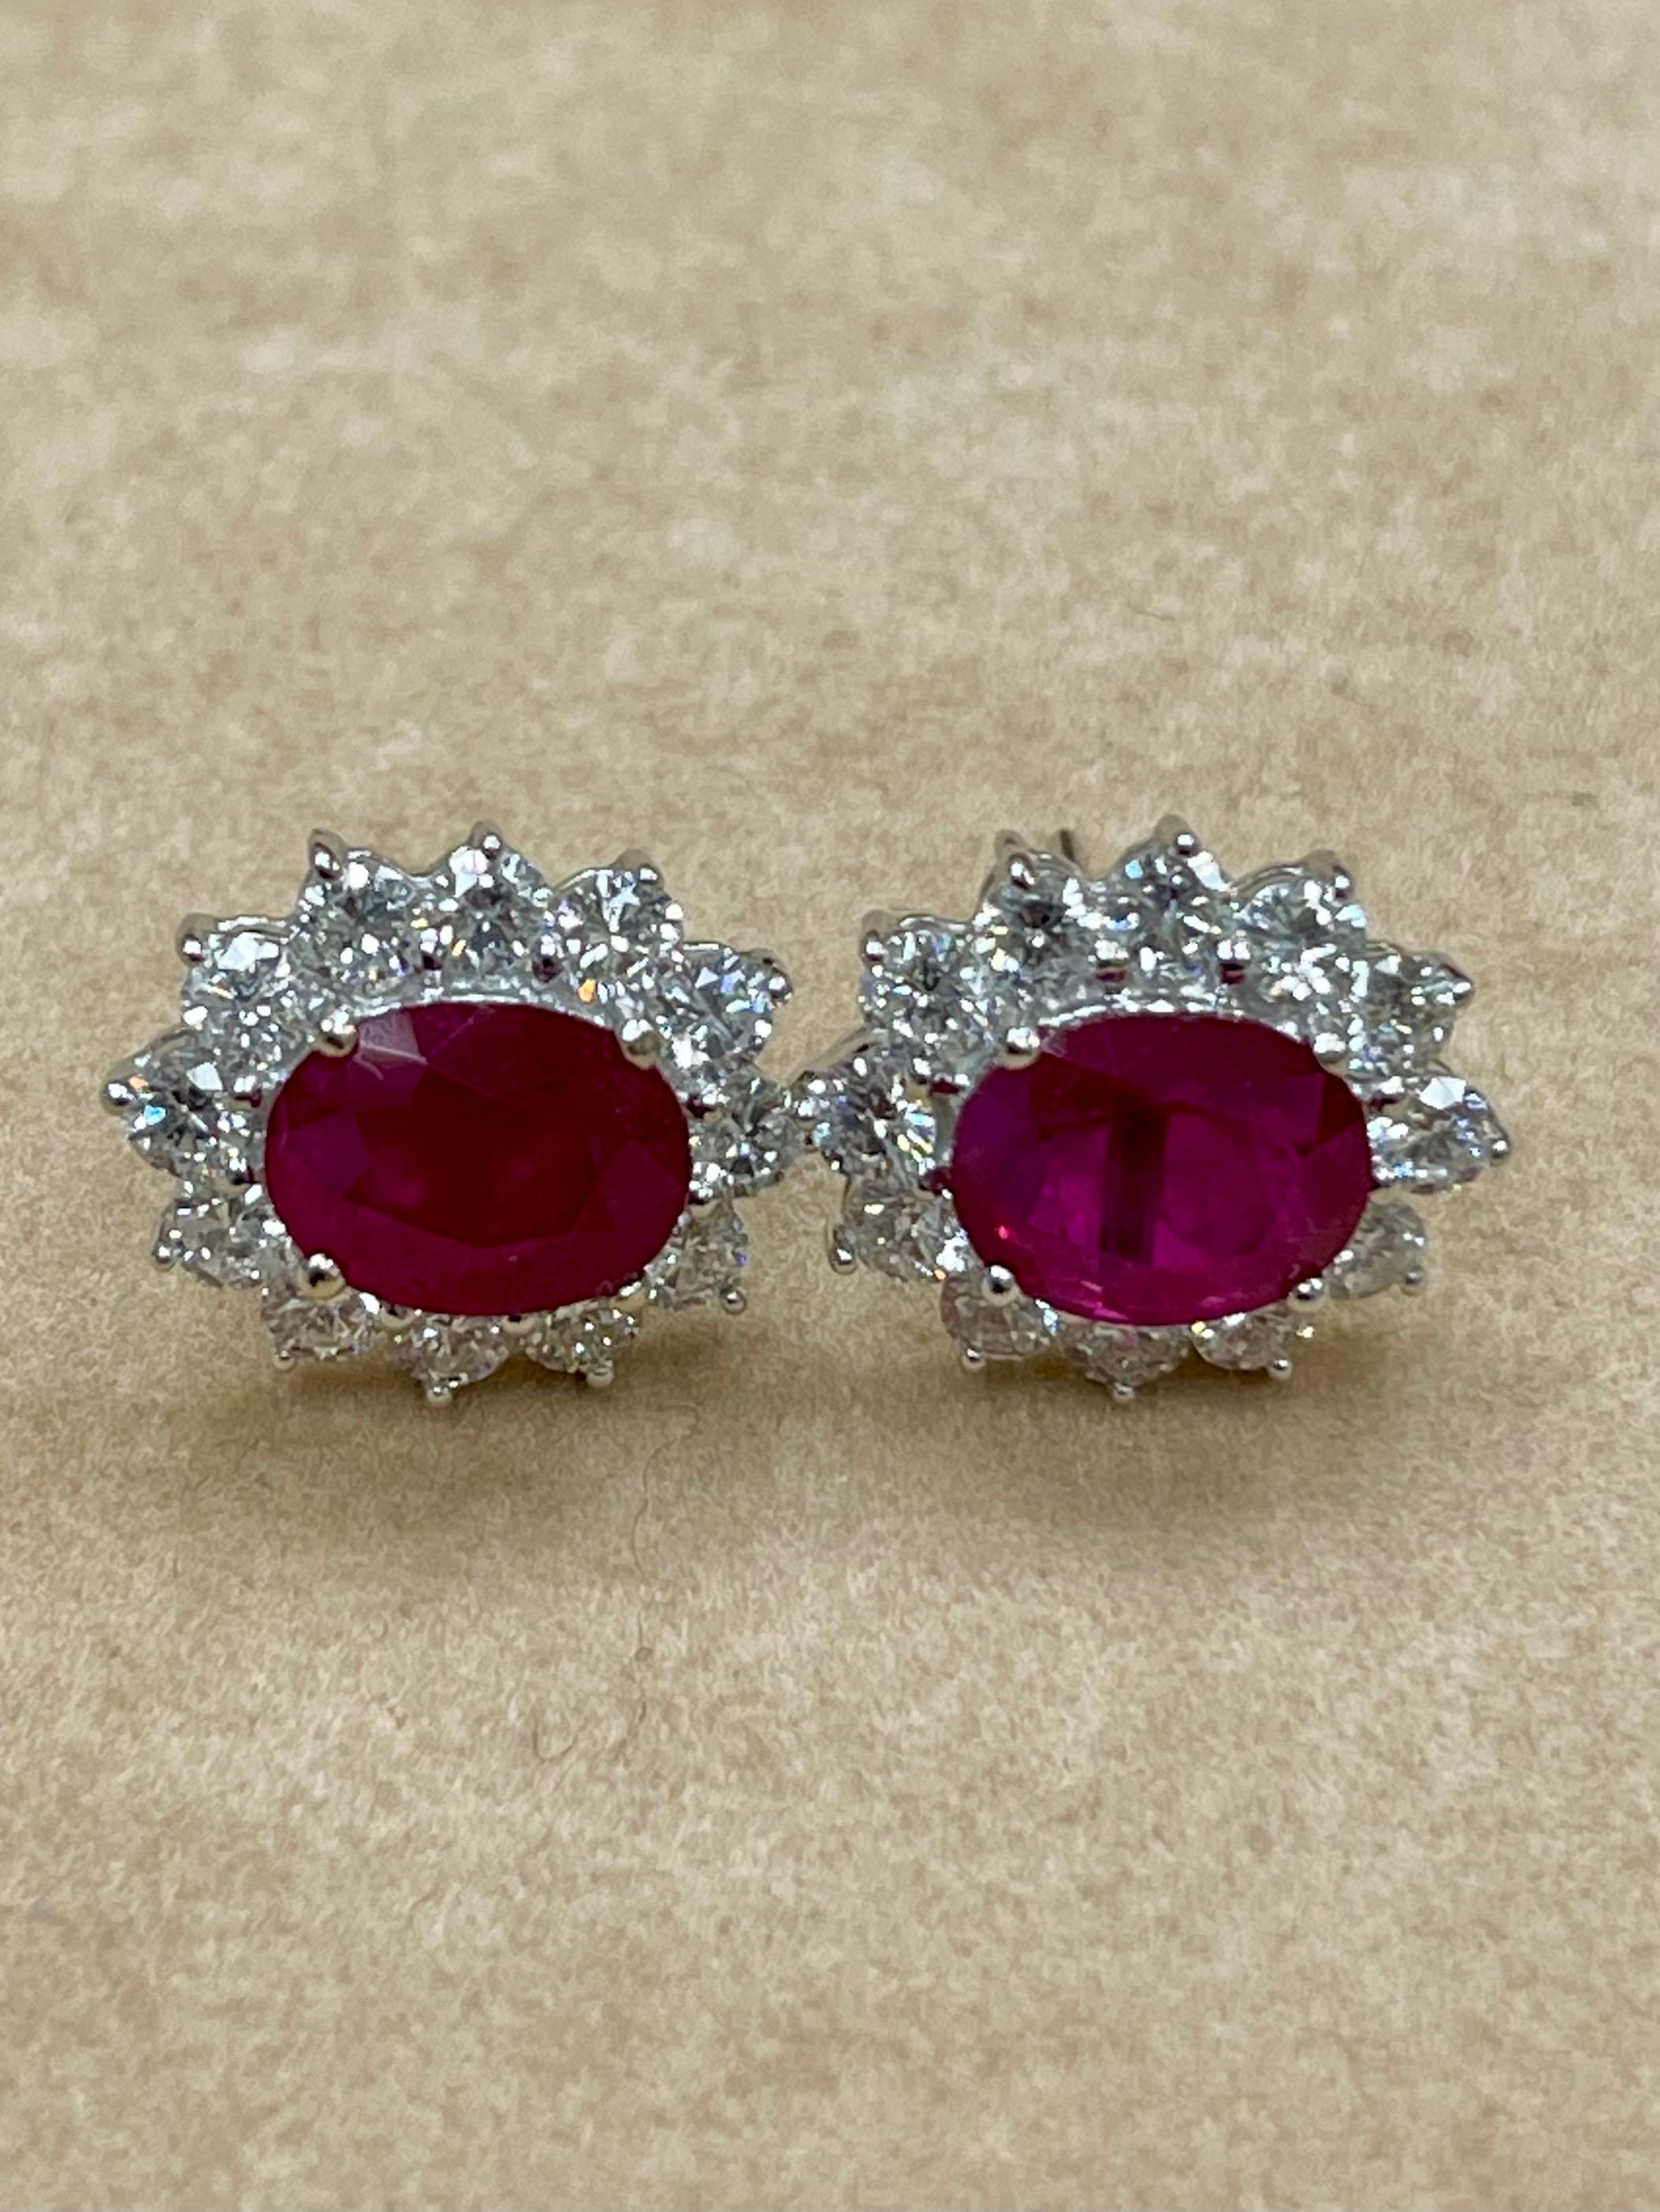 Vivid Red Ruby 4.00 CTW & Diamond Stud Earrings, Close to Pigeon Blood Red 9